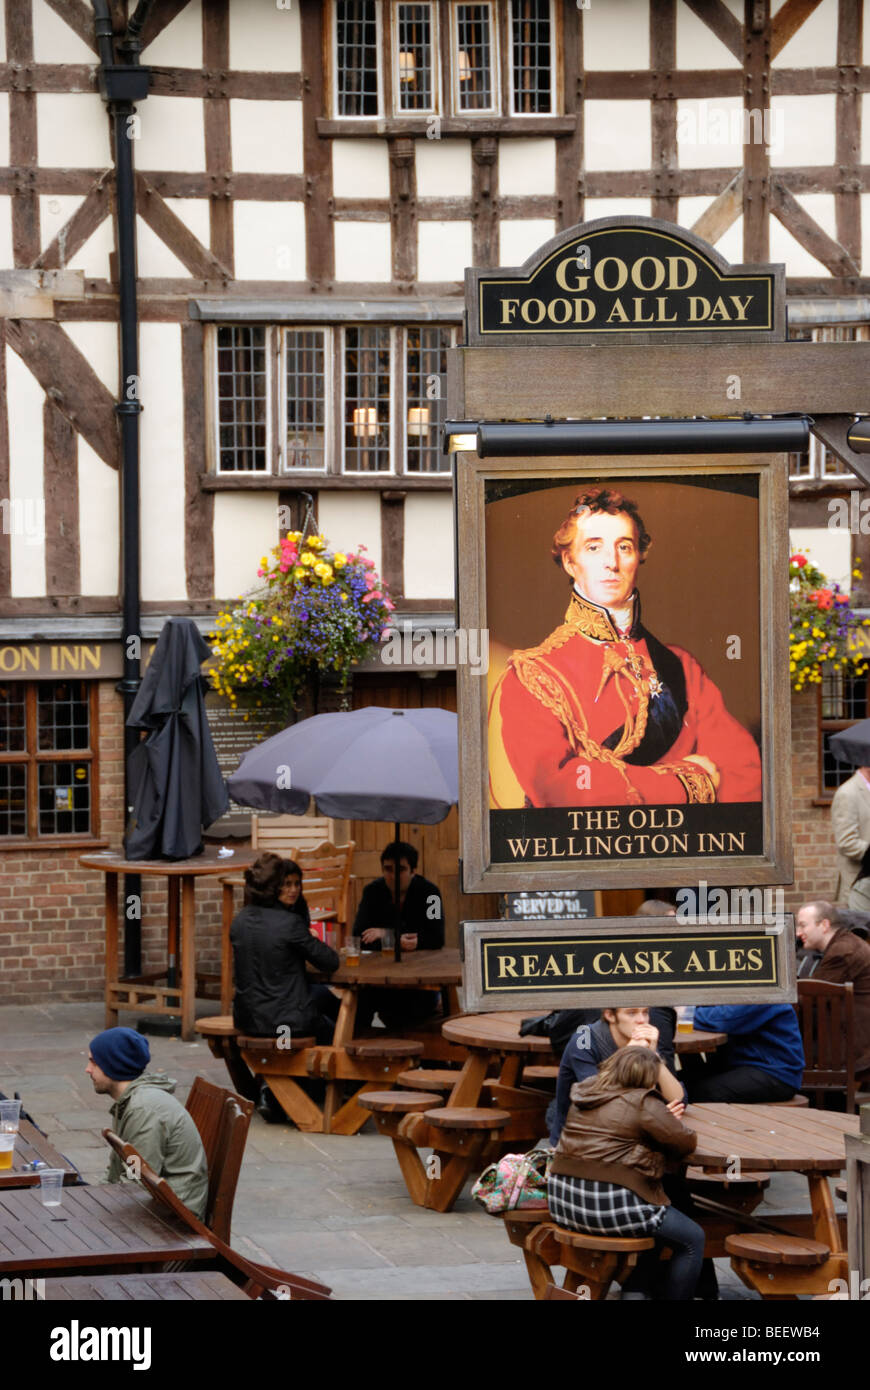 The Old Wellington Inn in New Cathedral Gate, Manchester, England, UK. Stock Photo